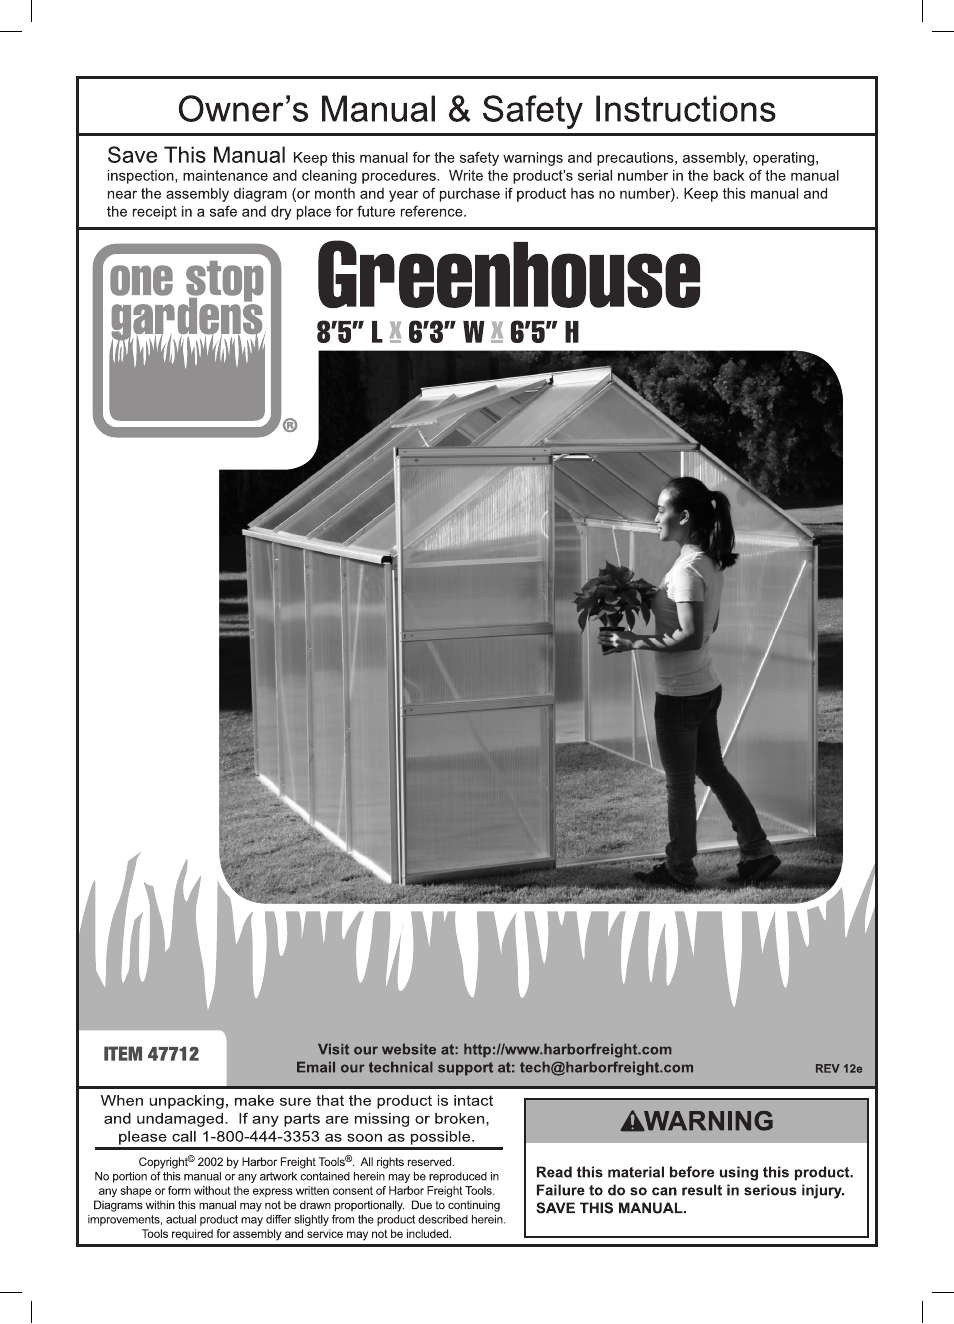 Greenhouse one stop gardens